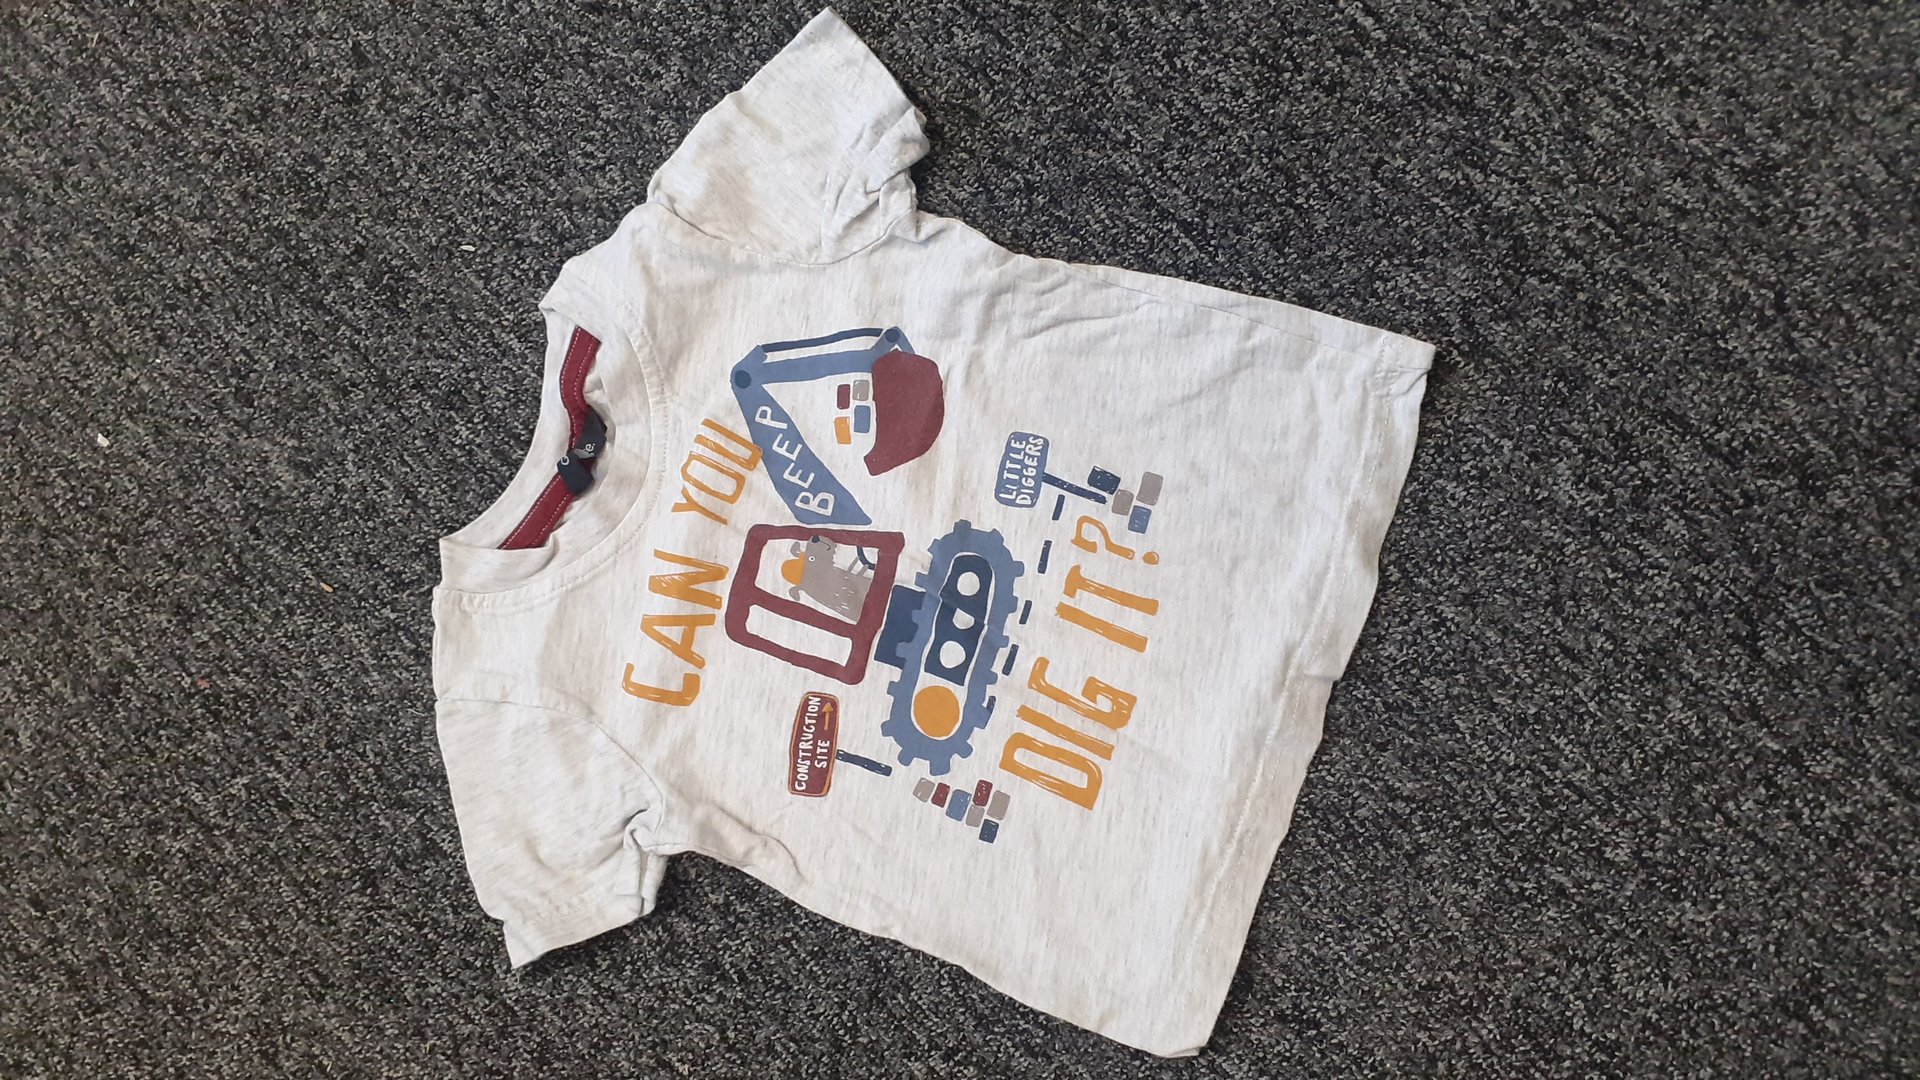 PRELOVED George ''Can You Dig It?'' Grey T-shirt 1.5-2 Yrs (86-92cm) RRP £4 CLEARANCE XL £2.49